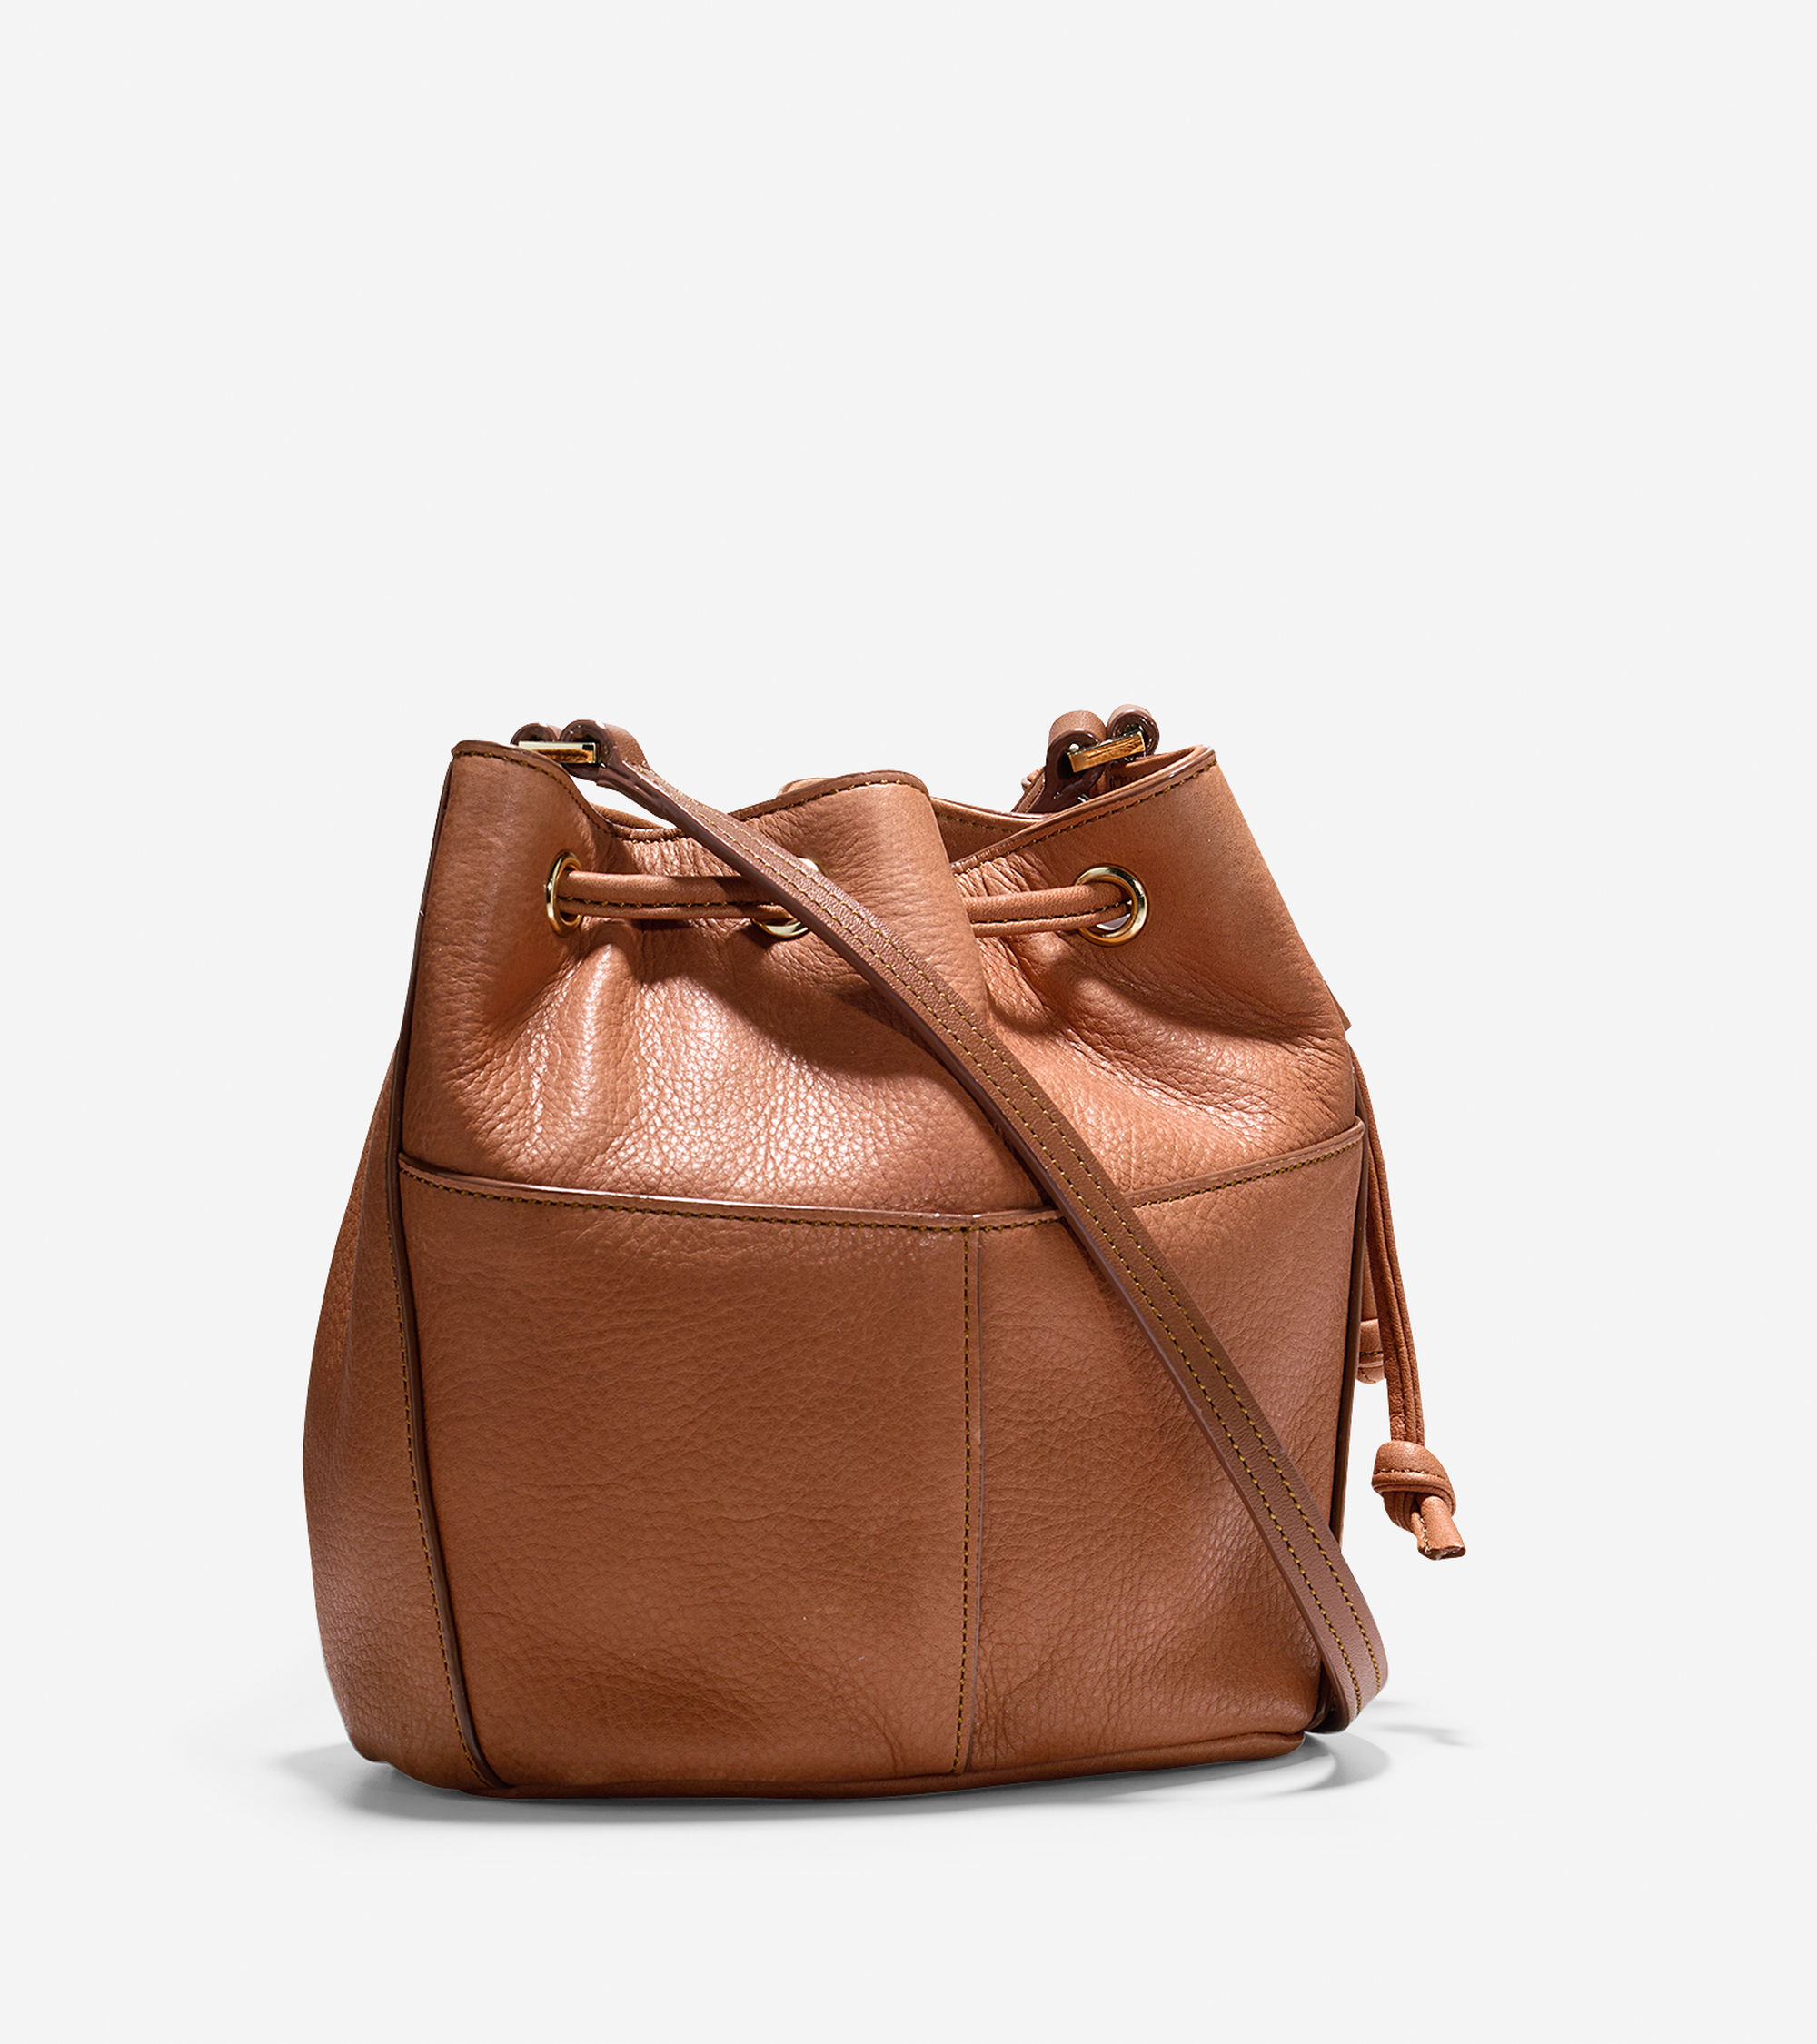 Lyst - Cole haan Felicity Mini Drawstring in Brown